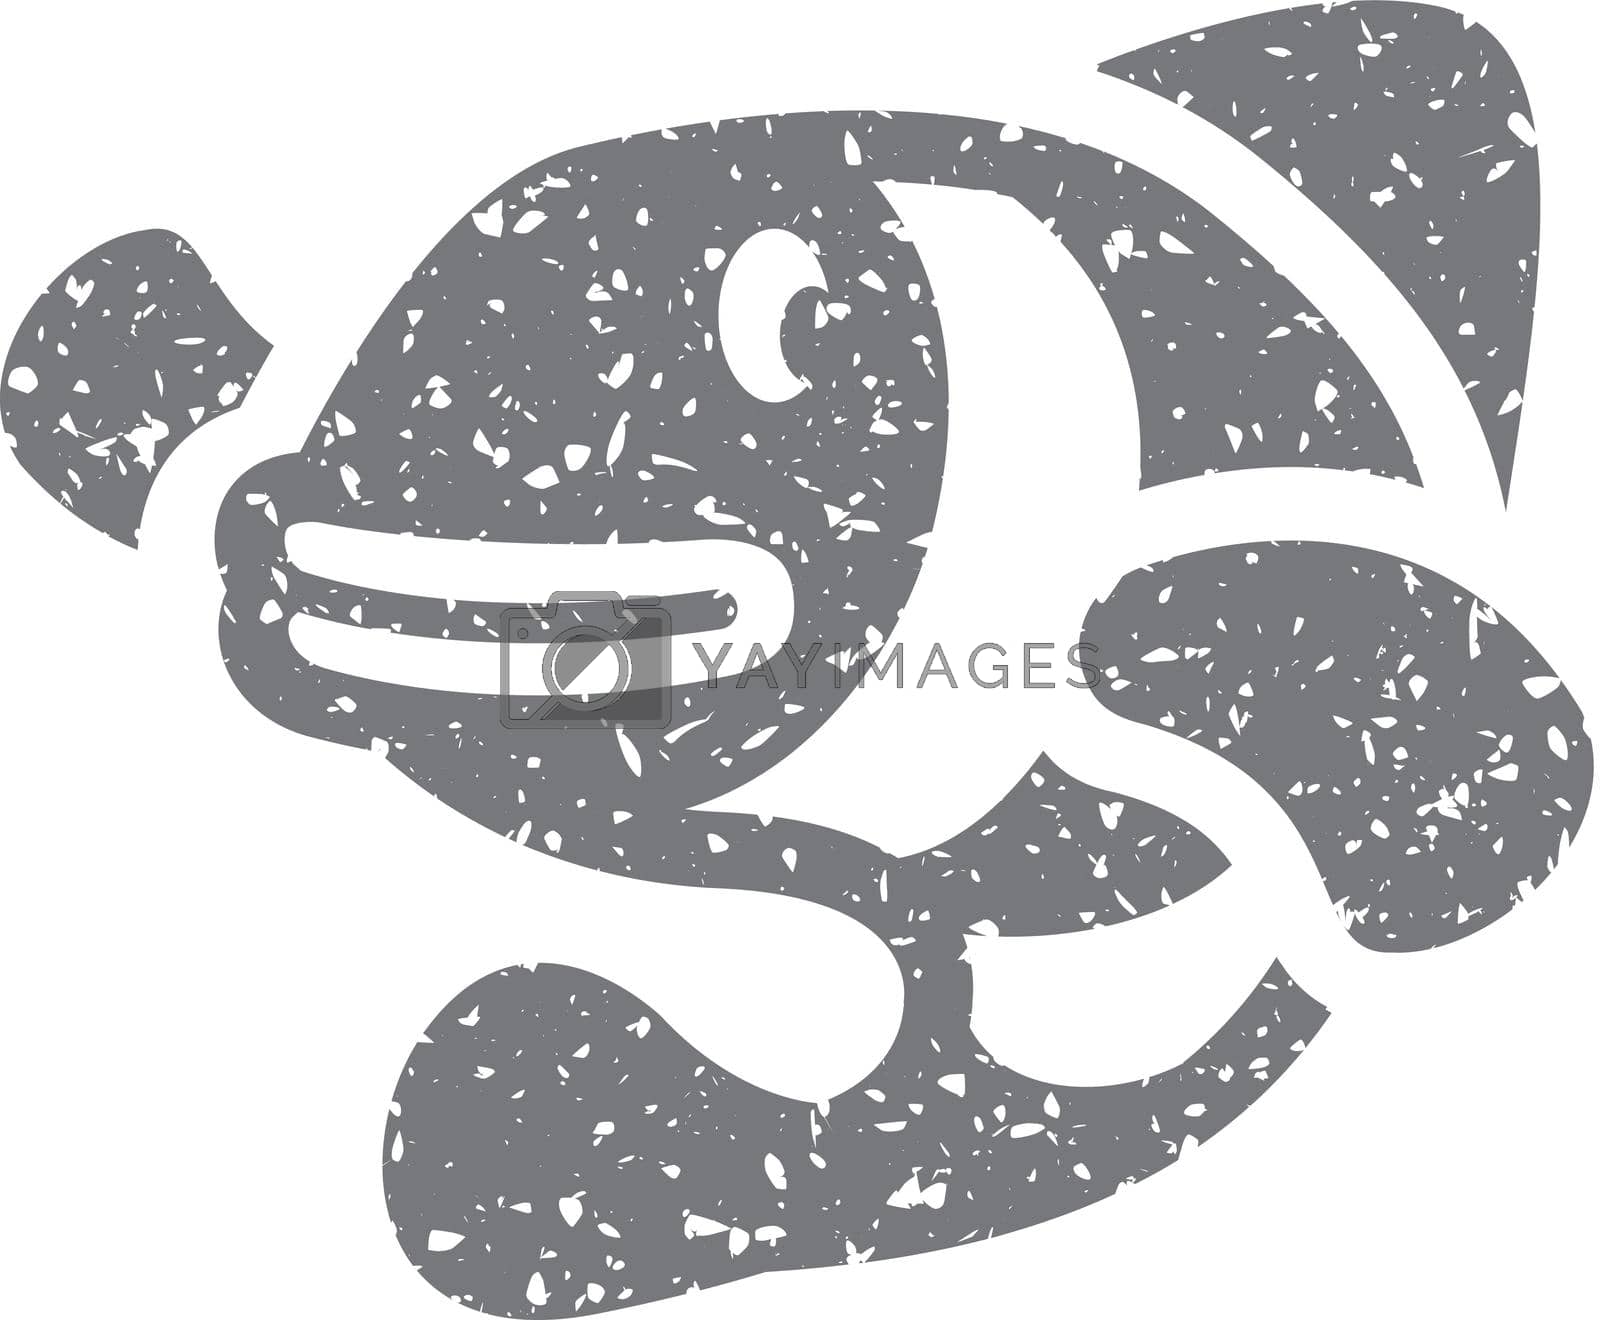 Royalty free image of Grunge icon - Clown fish by puruan